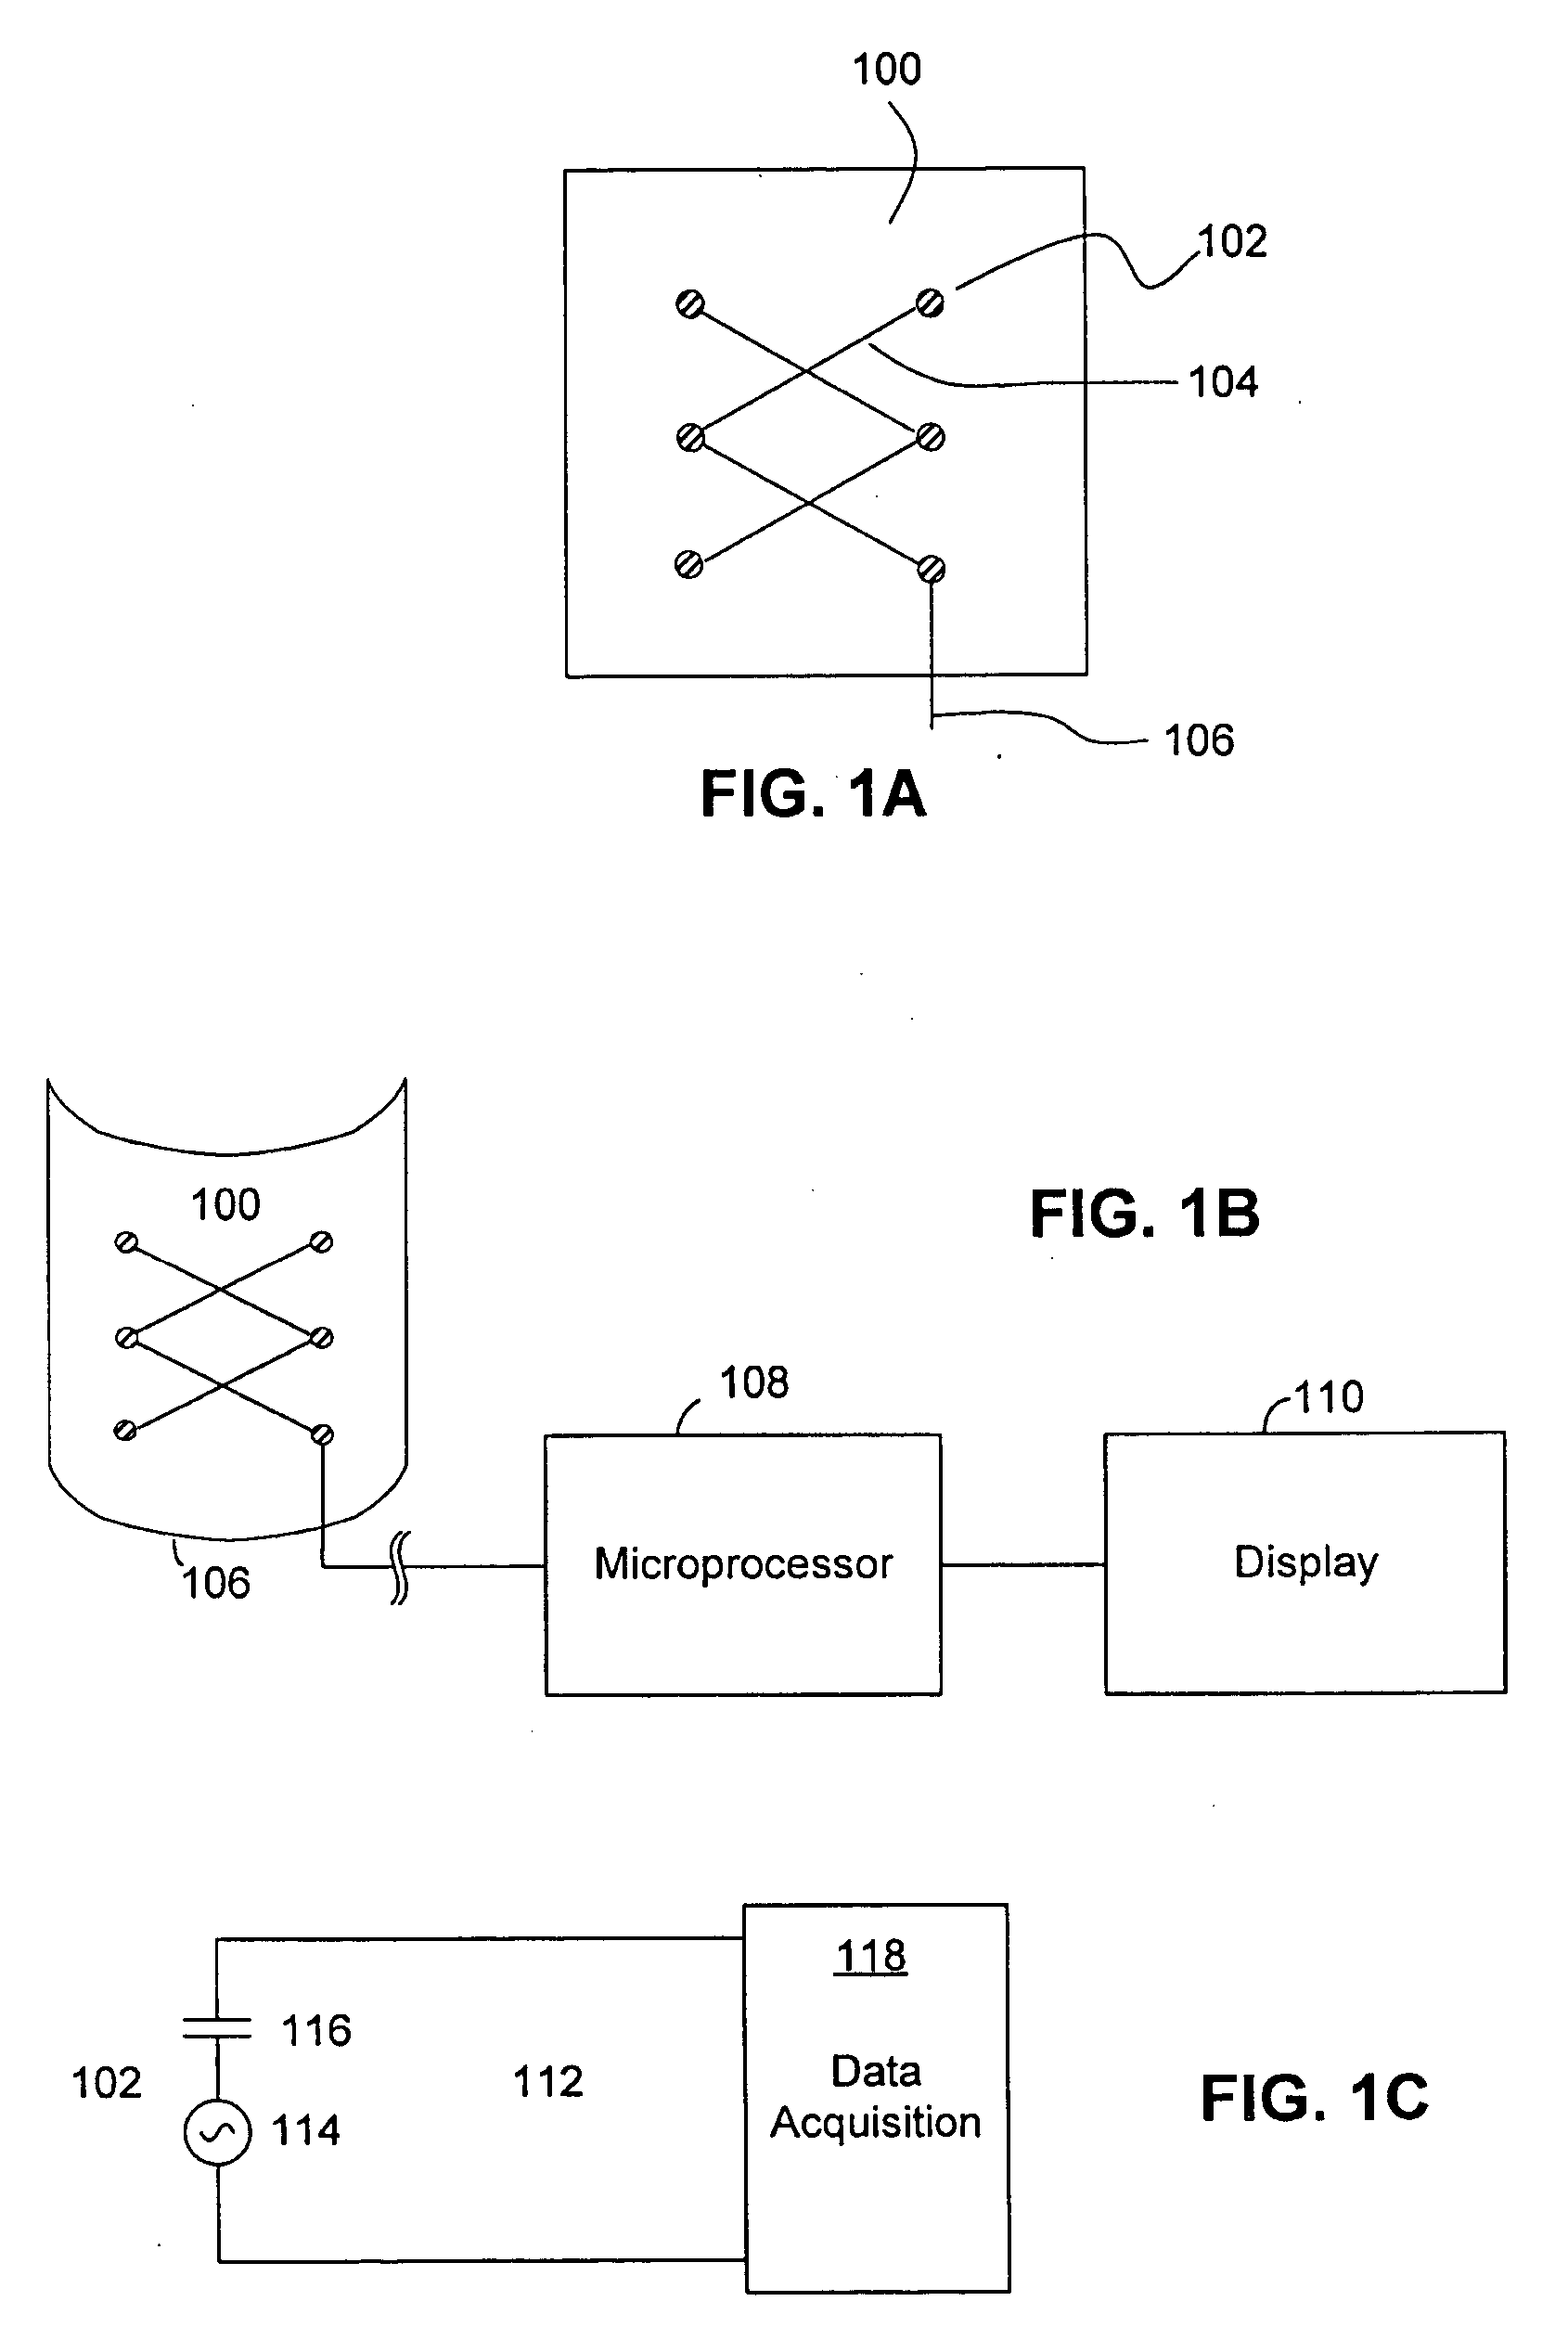 Method of detecting and analyzing changes in the external loading conditions of a structure